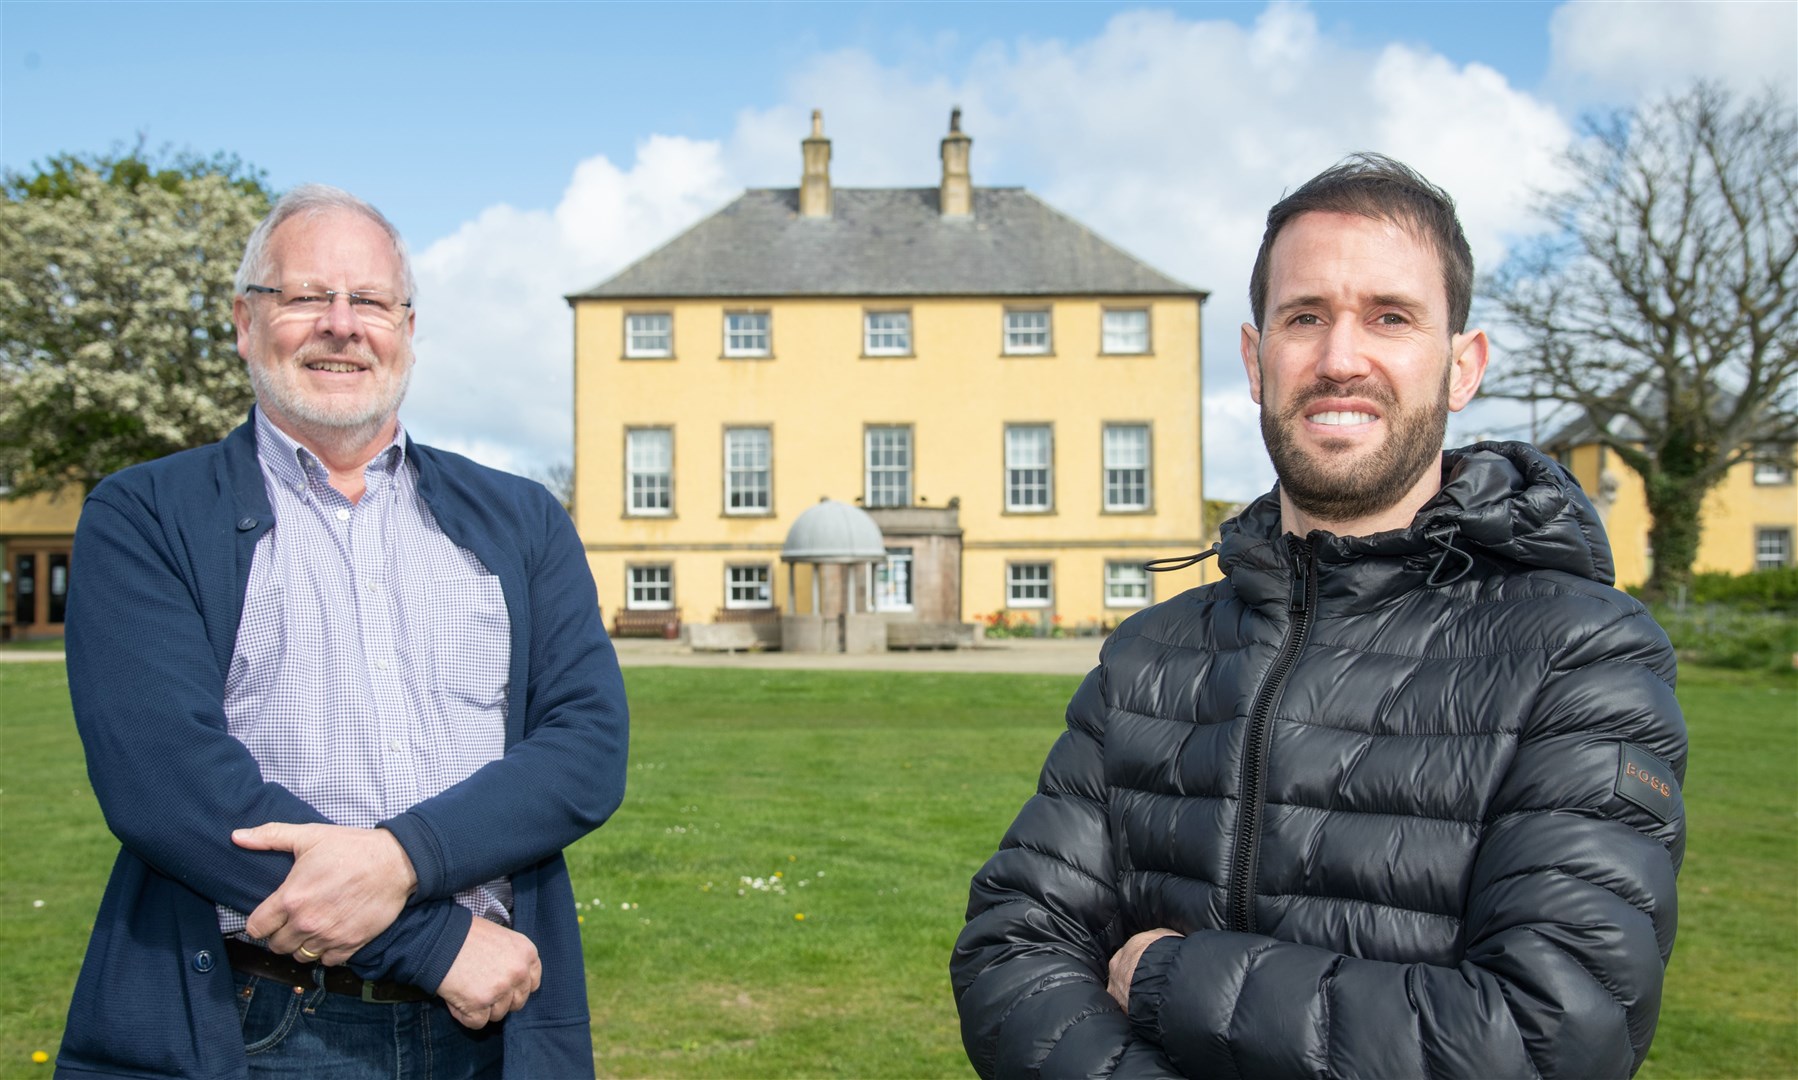 Banff Councillor John Cox (left) is joined by Russell Aitchison (right) organiser of a new music festival in Banff - that will be held in the Castle gorunds. Picture: Daniel Forsyth.